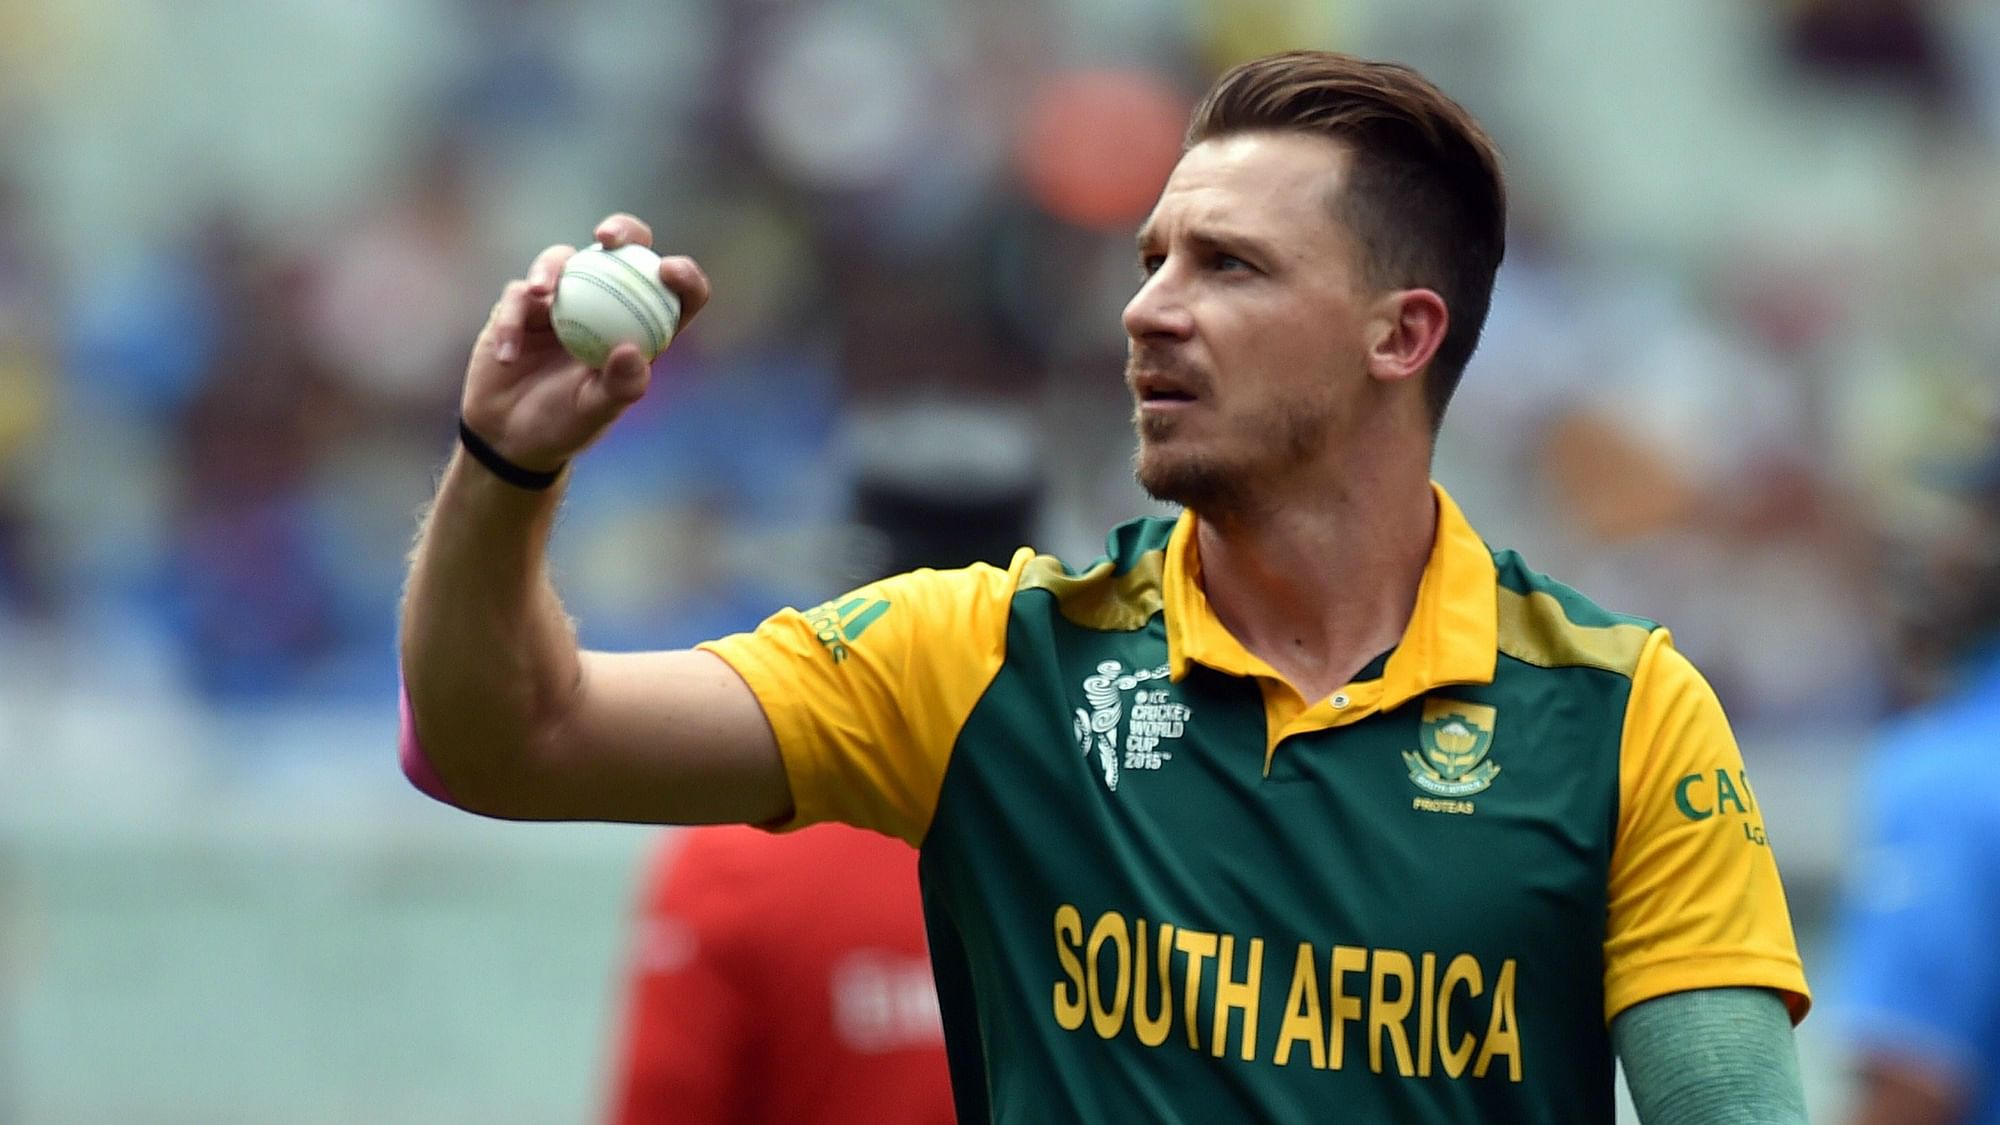 IND vs SA World Cup 2019: South Africa has suffered another big blow with pacer Dale Steyn being ruled out of the entire tournament.